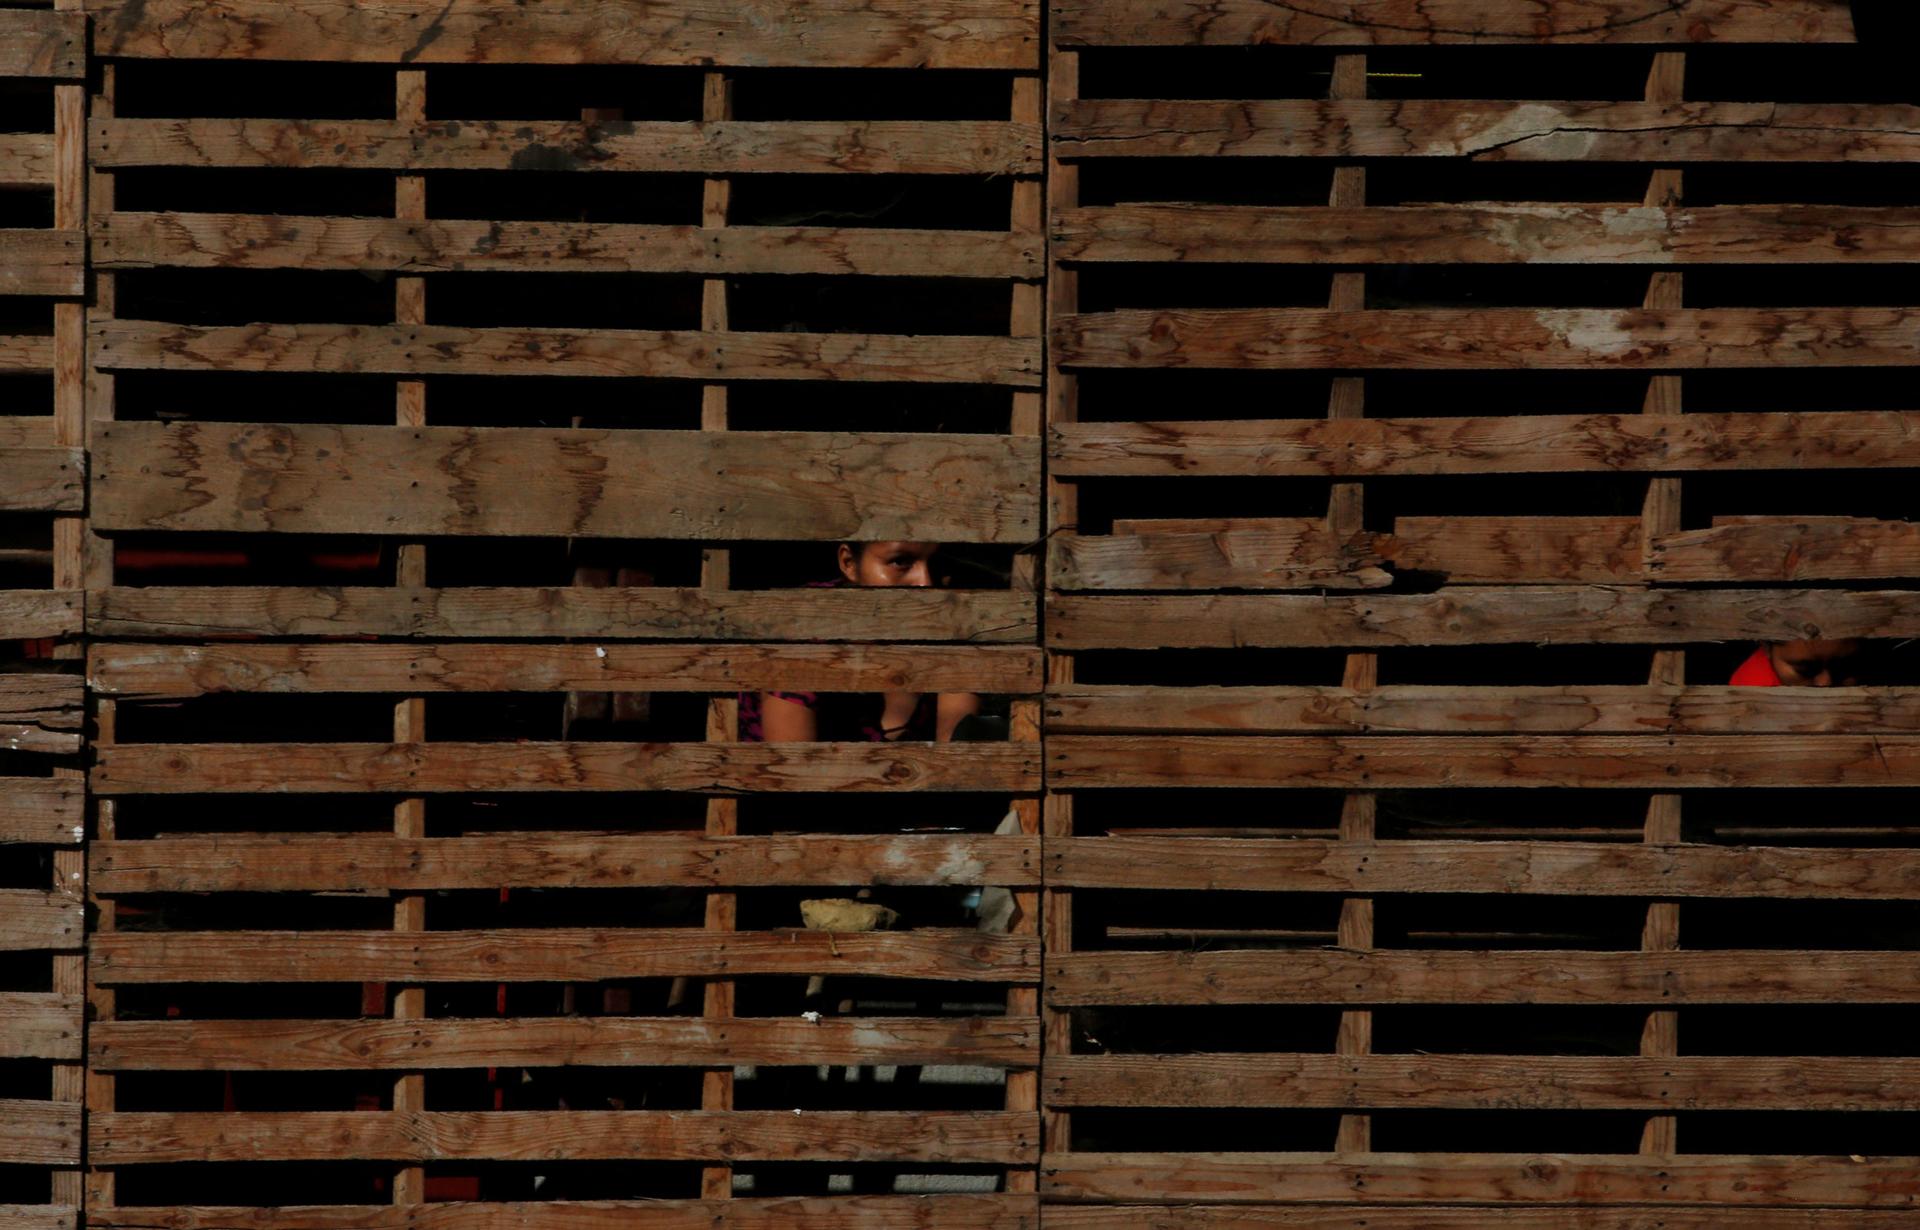 Horizontal wooden slats are shown across the entire photograph with the face of a woman in shadown.